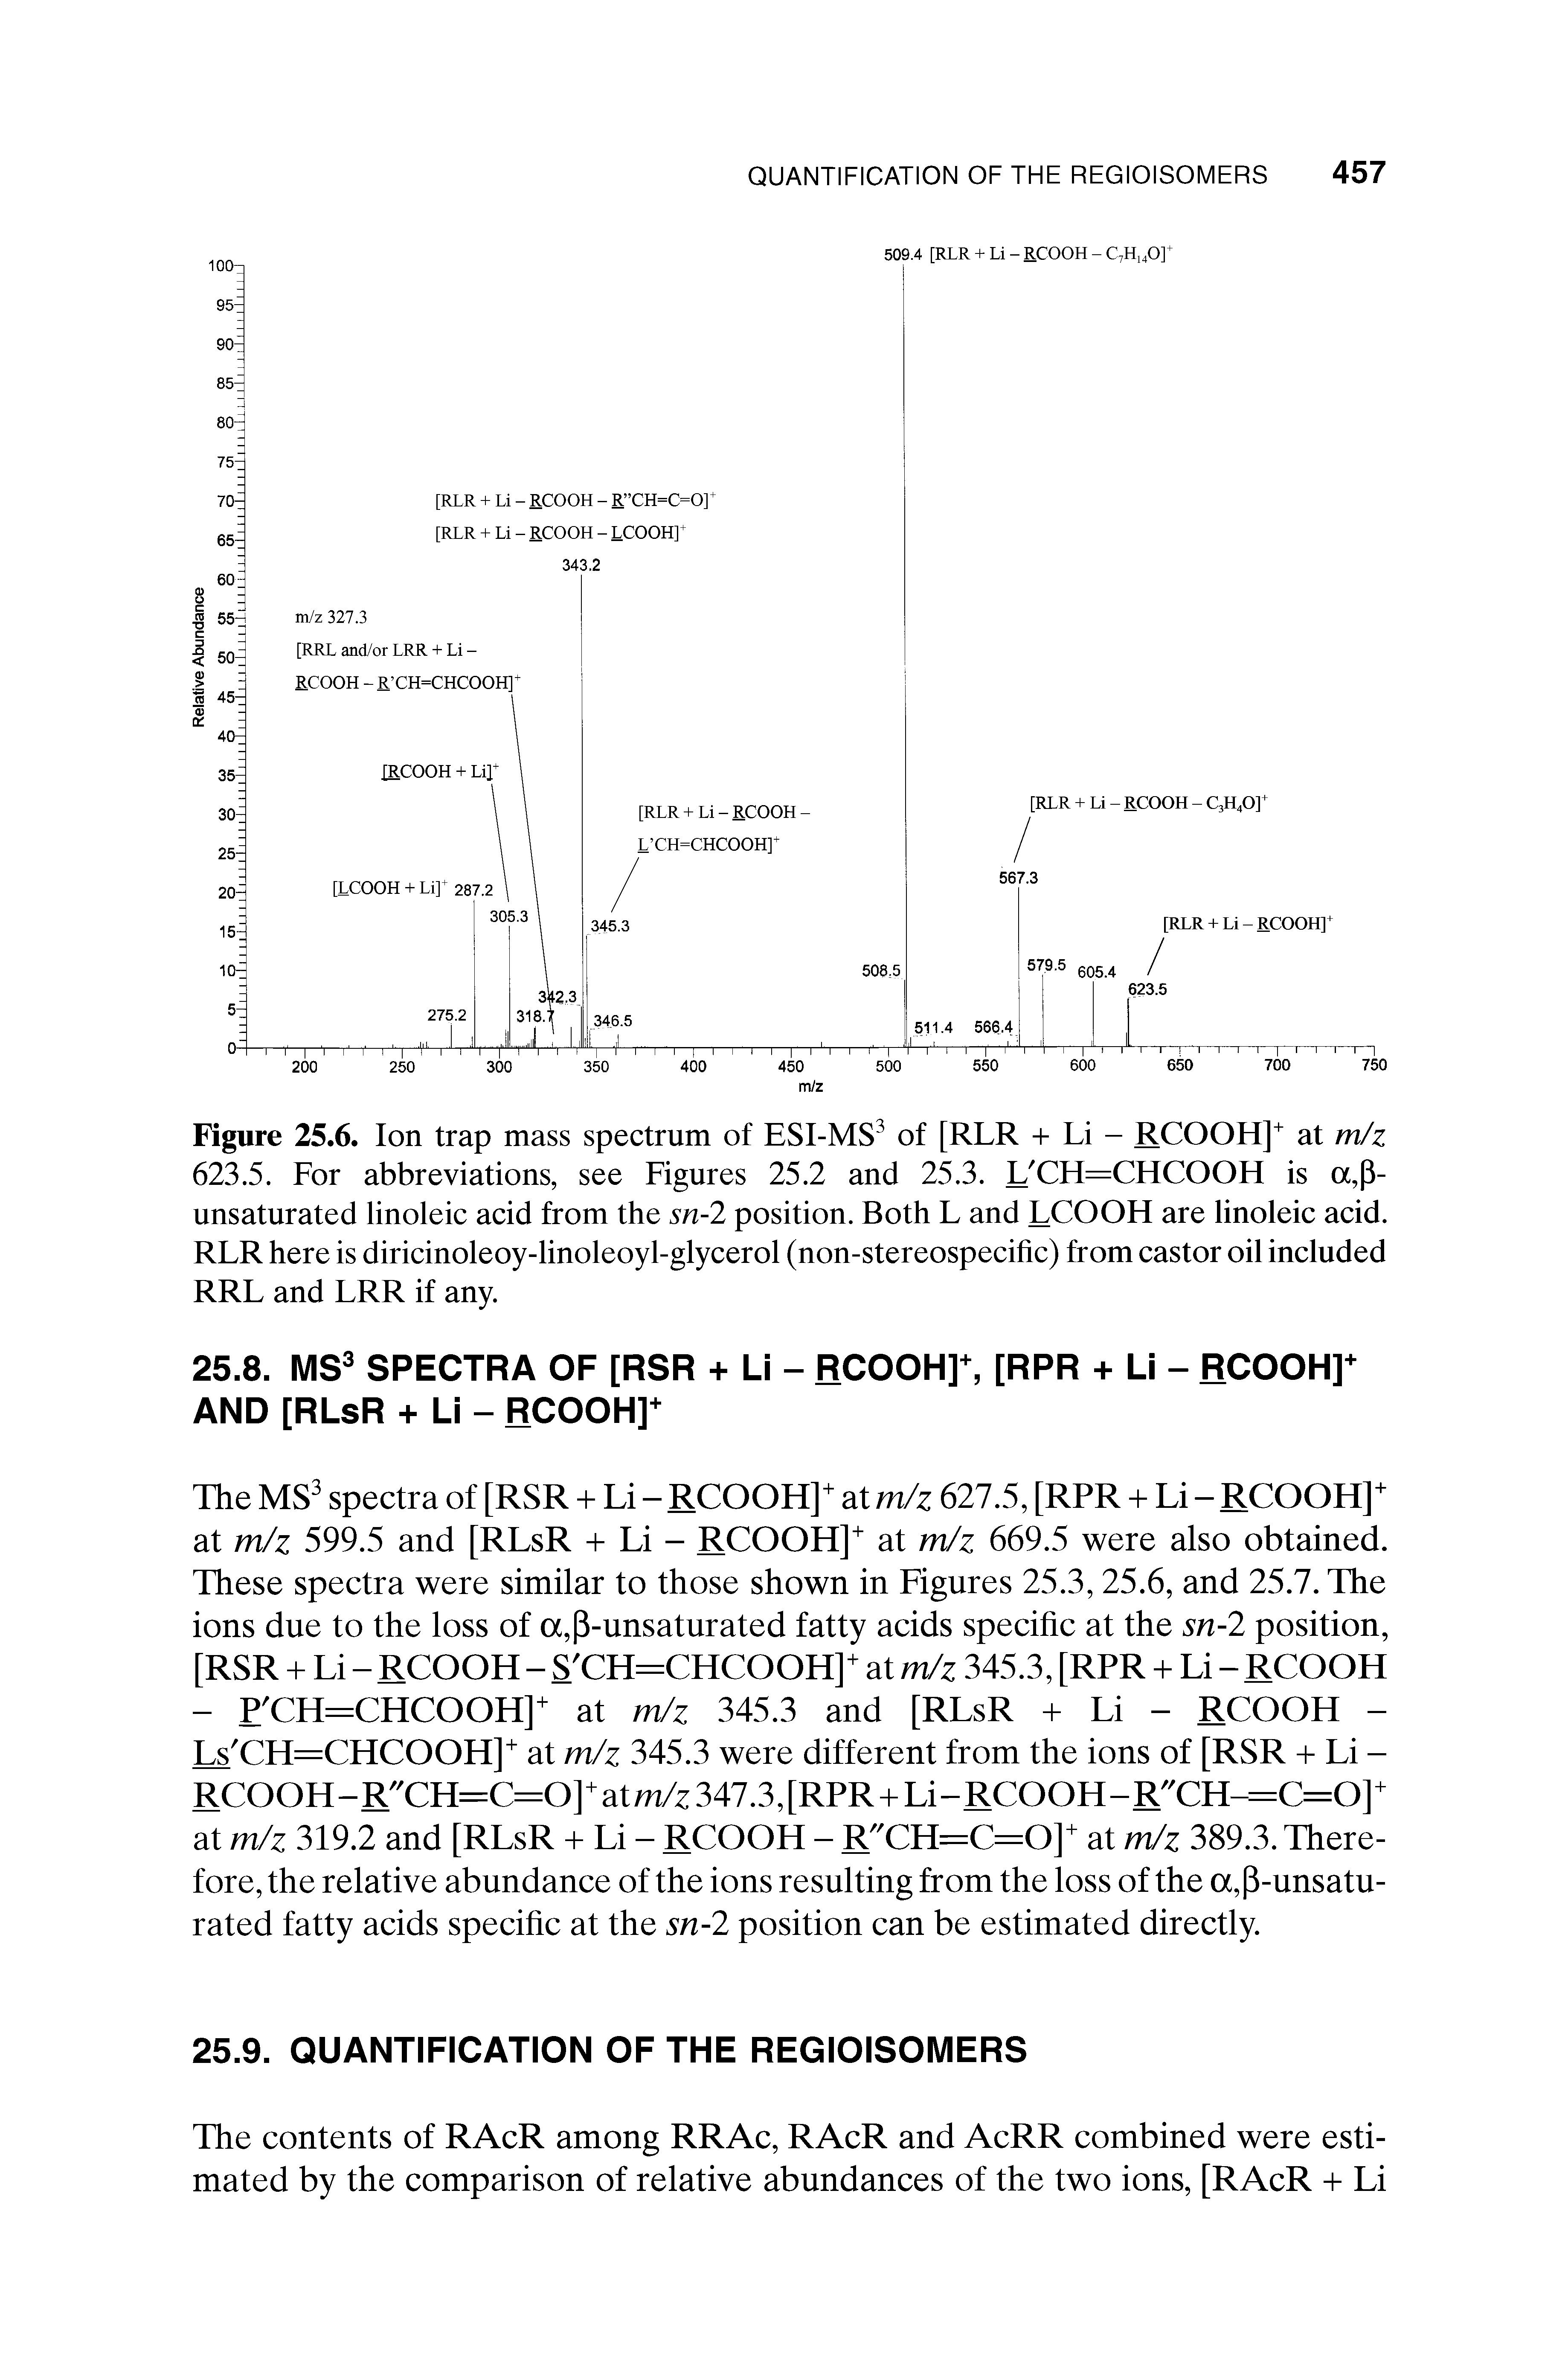 Figure 25.6. Ion trap mass spectrum of ESI-MS3 of [RLR + Li - RCOOH]+ at m/z 623.5. For abbreviations, see Figures 25.2 and 25.3. L CH=CHCOOH is oc,p-unsaturated linoleic acid from the sn-2 position. Both L and LCOOH are linoleic acid. RLR here is diricinoleoy-linoleoyl-glycerol (non-stereospecific) from castor oil included RRL and LRR if any.